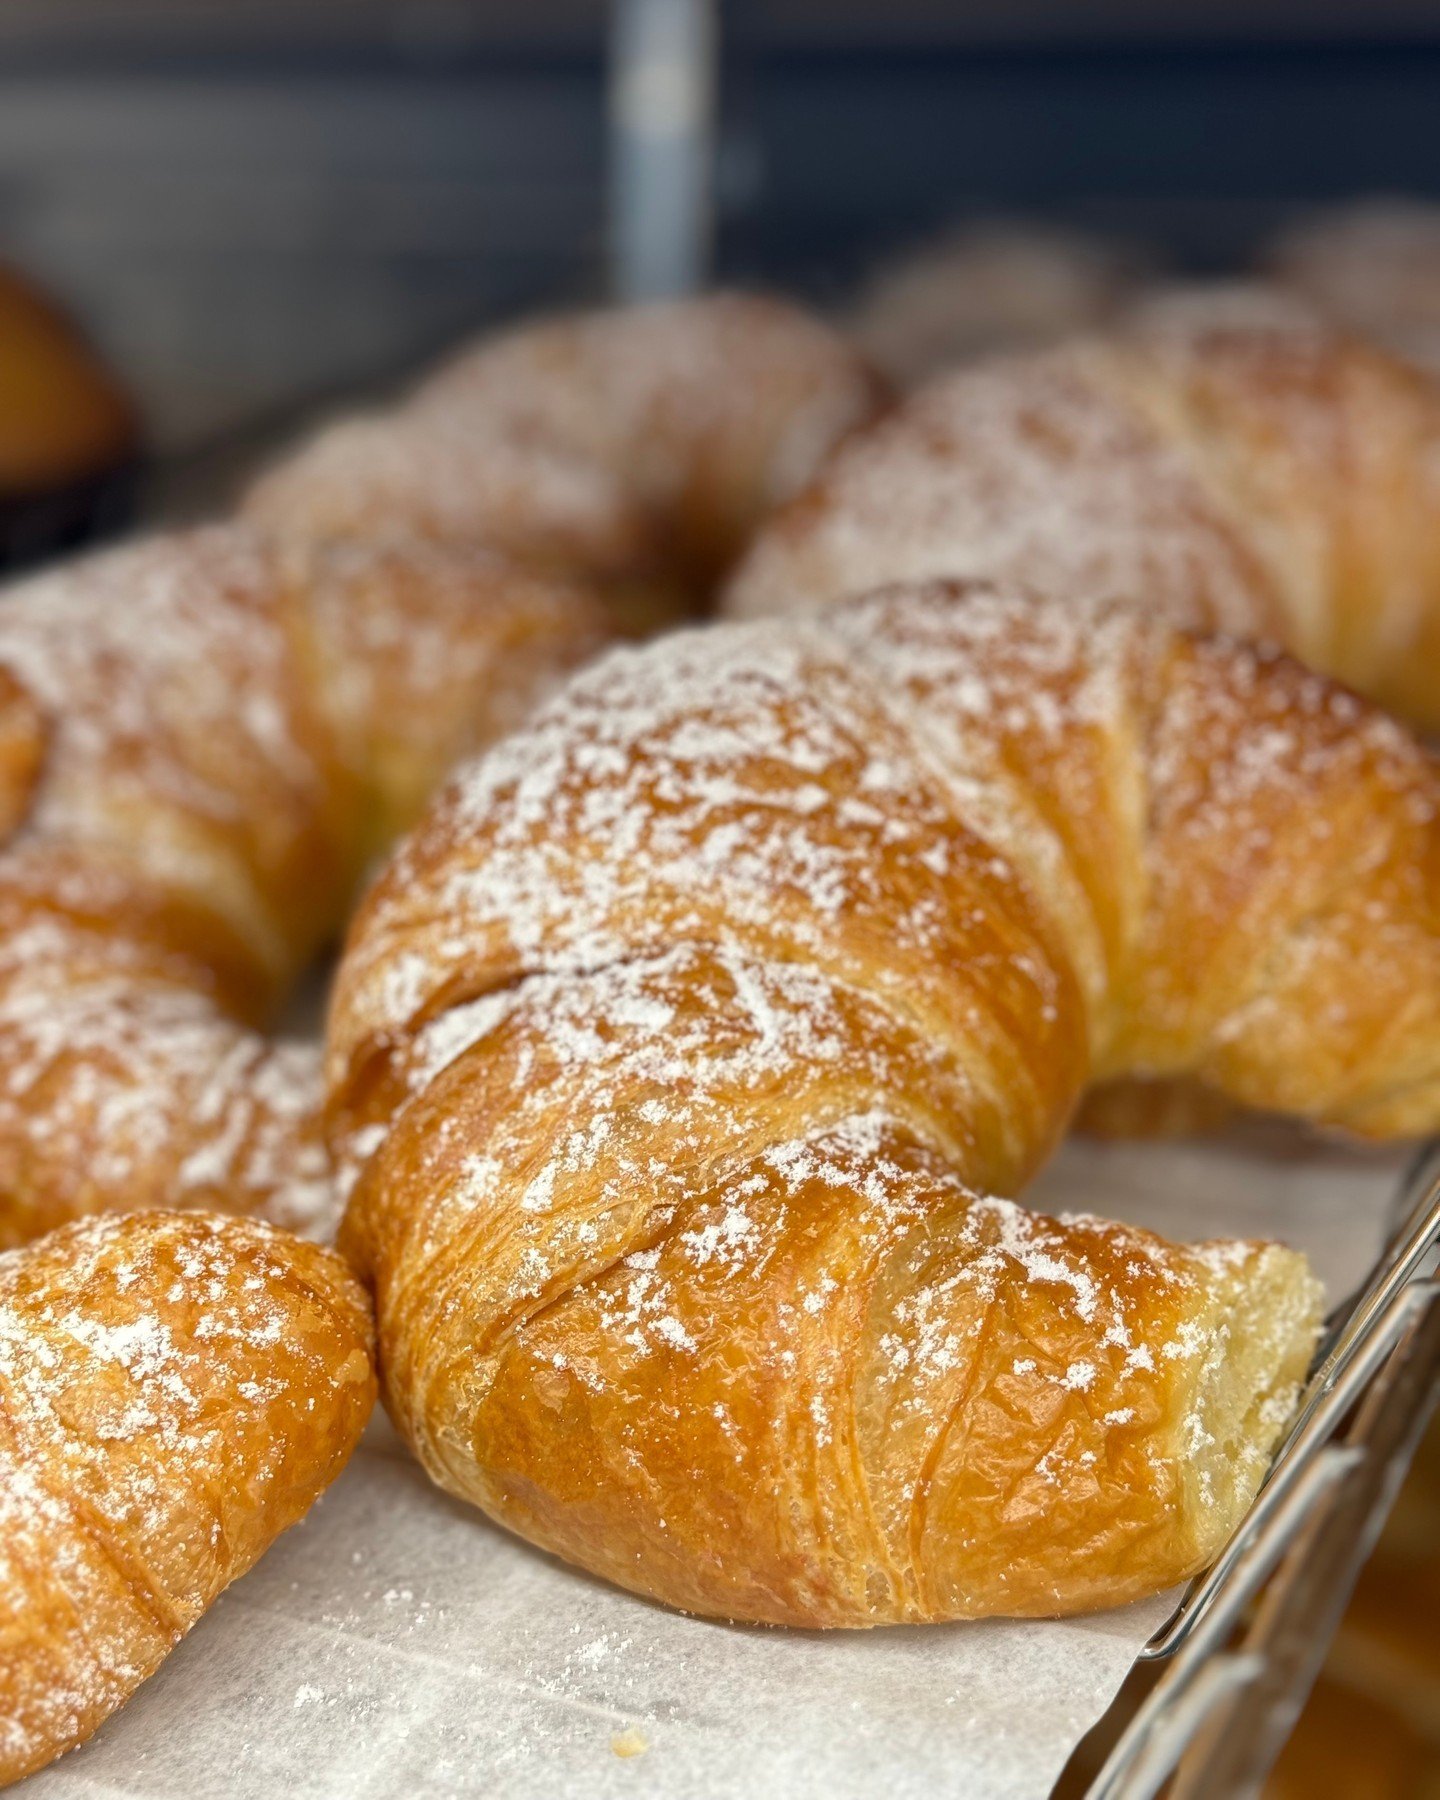 🥐🤤 Indulge in the sweet surprise of our Raspberry Jelly Filled Croissant, a beloved classic from Glenn Wayne Bakery. Perfect for any pastry lover!

📍 Bohemia, NY
📞 631-256-5140
📞 631-319-6266
🌐 www.GlennWayne.com

#Bakery #Croissant #GlennWayne